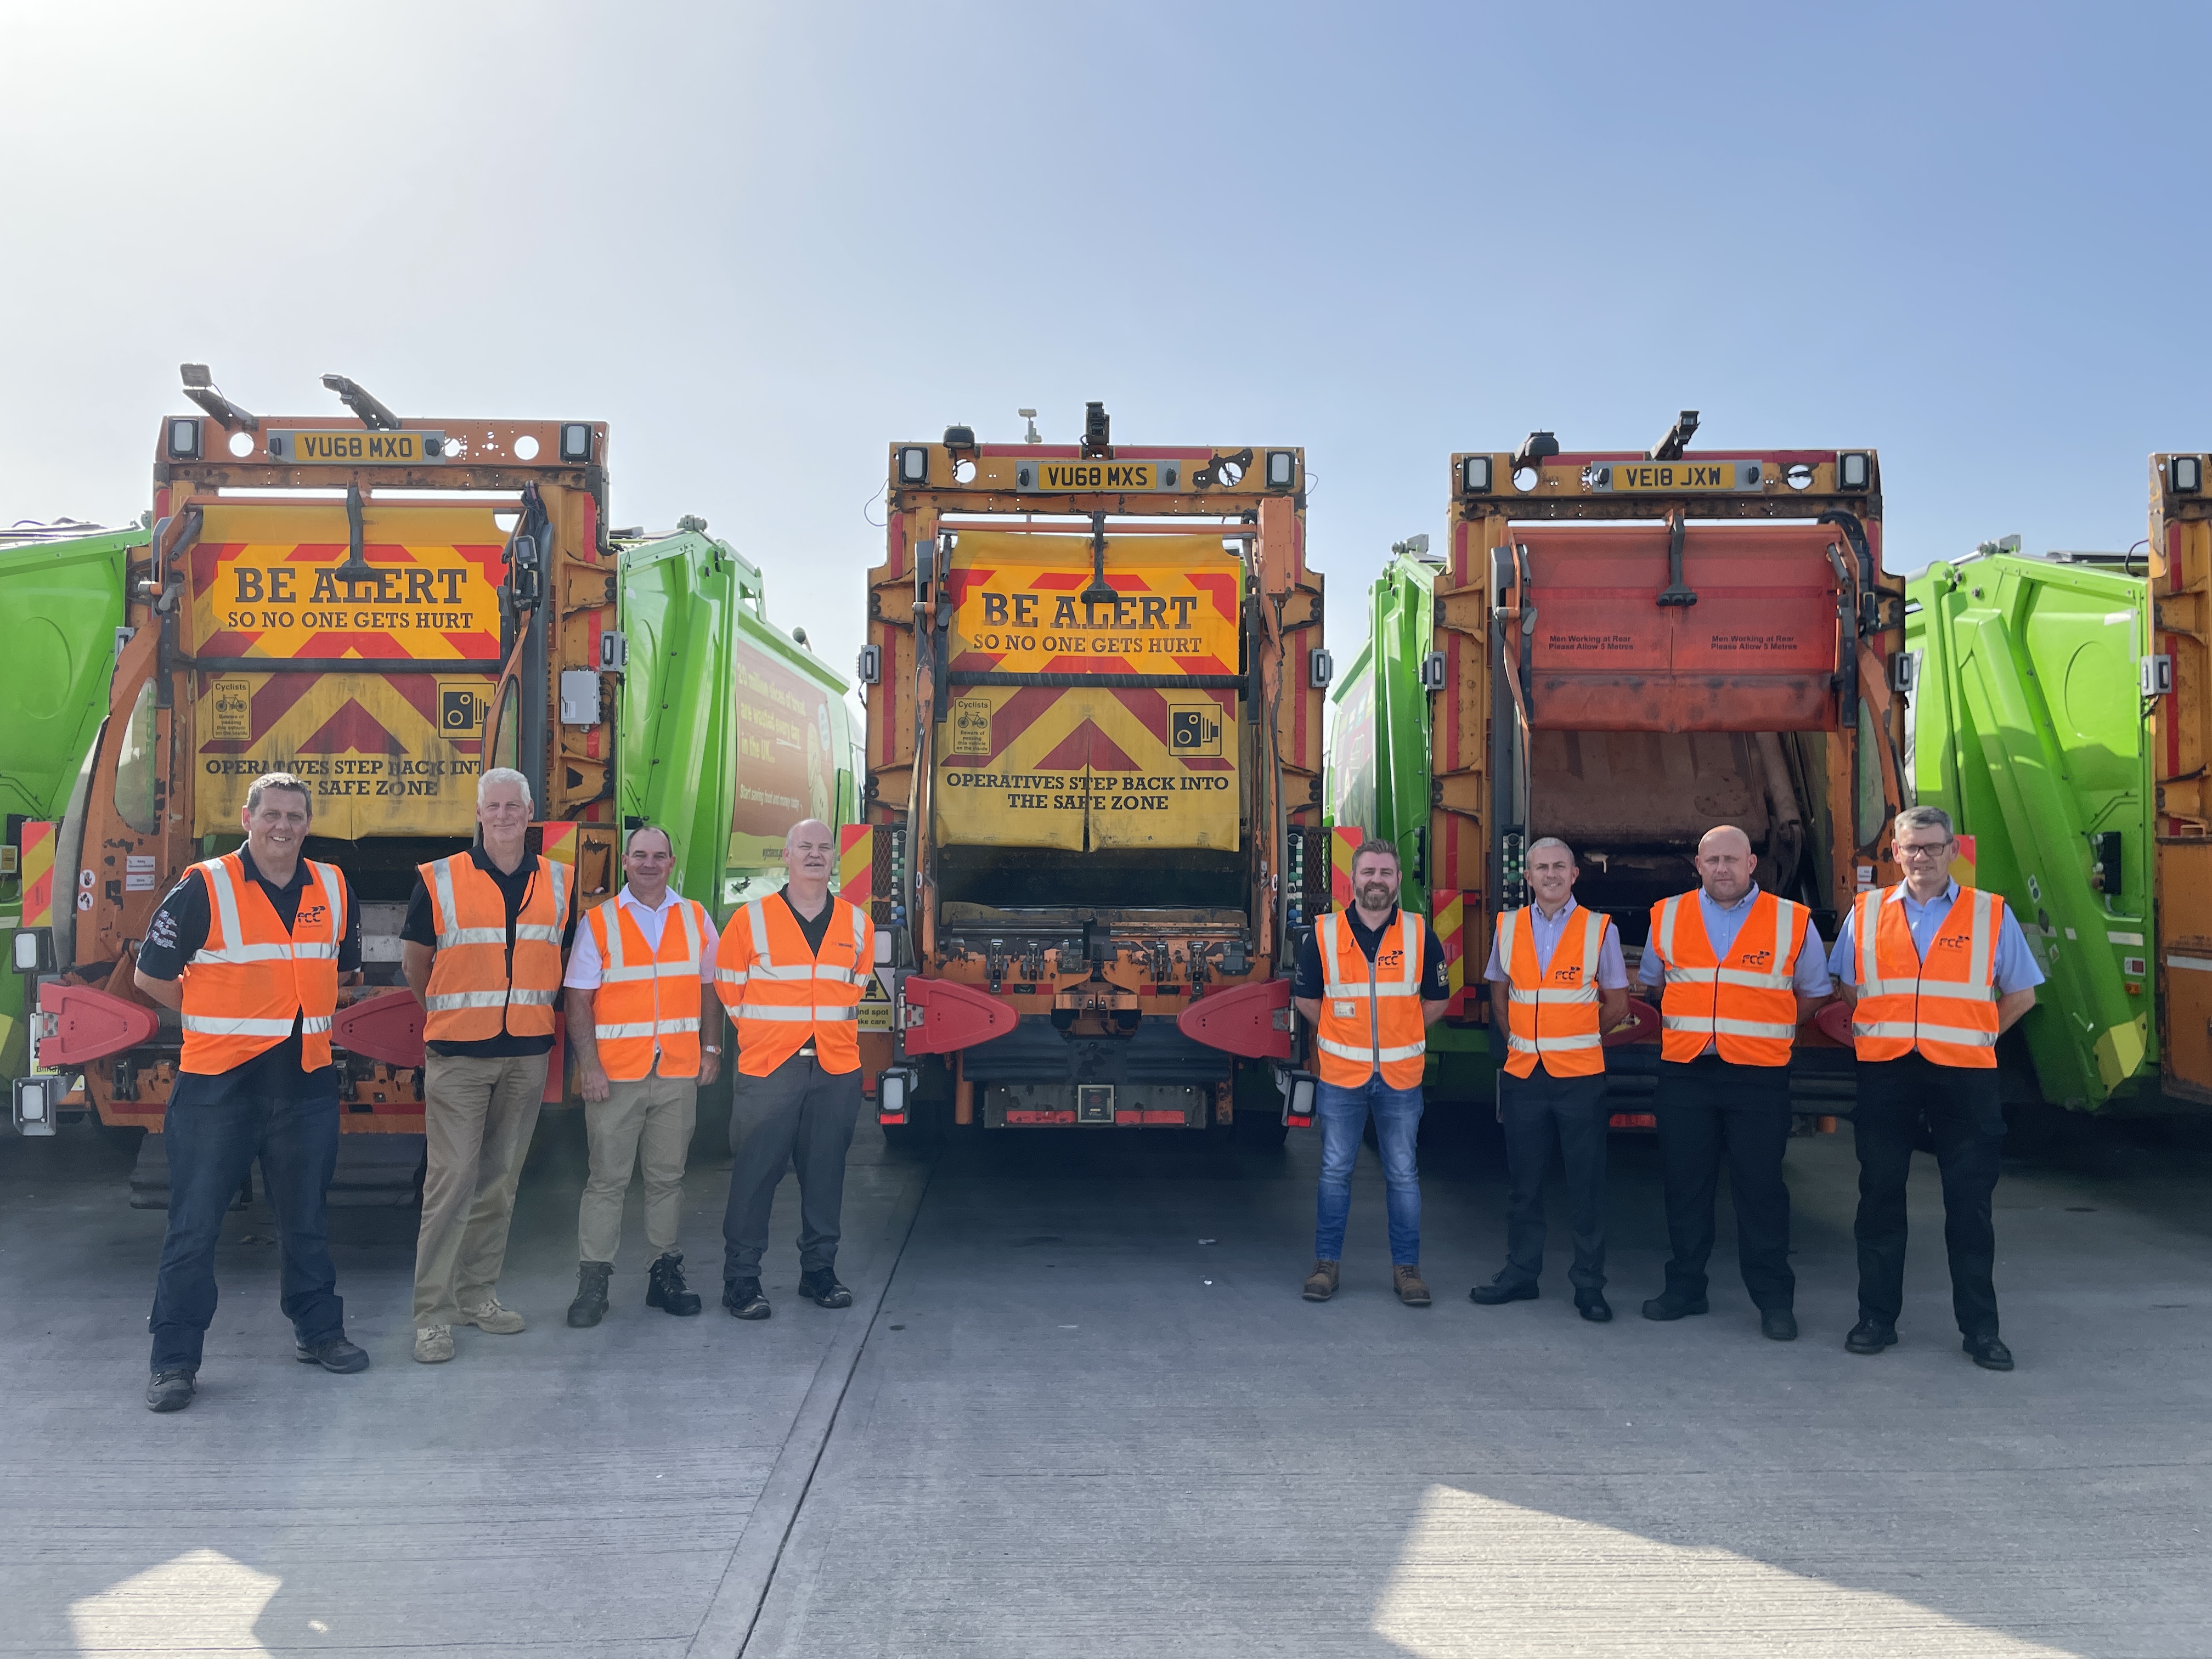 Representatives from SiteZone and FCC at the FCC Wychavon depot where the pilot programme of RCV Smart Loader has been running.